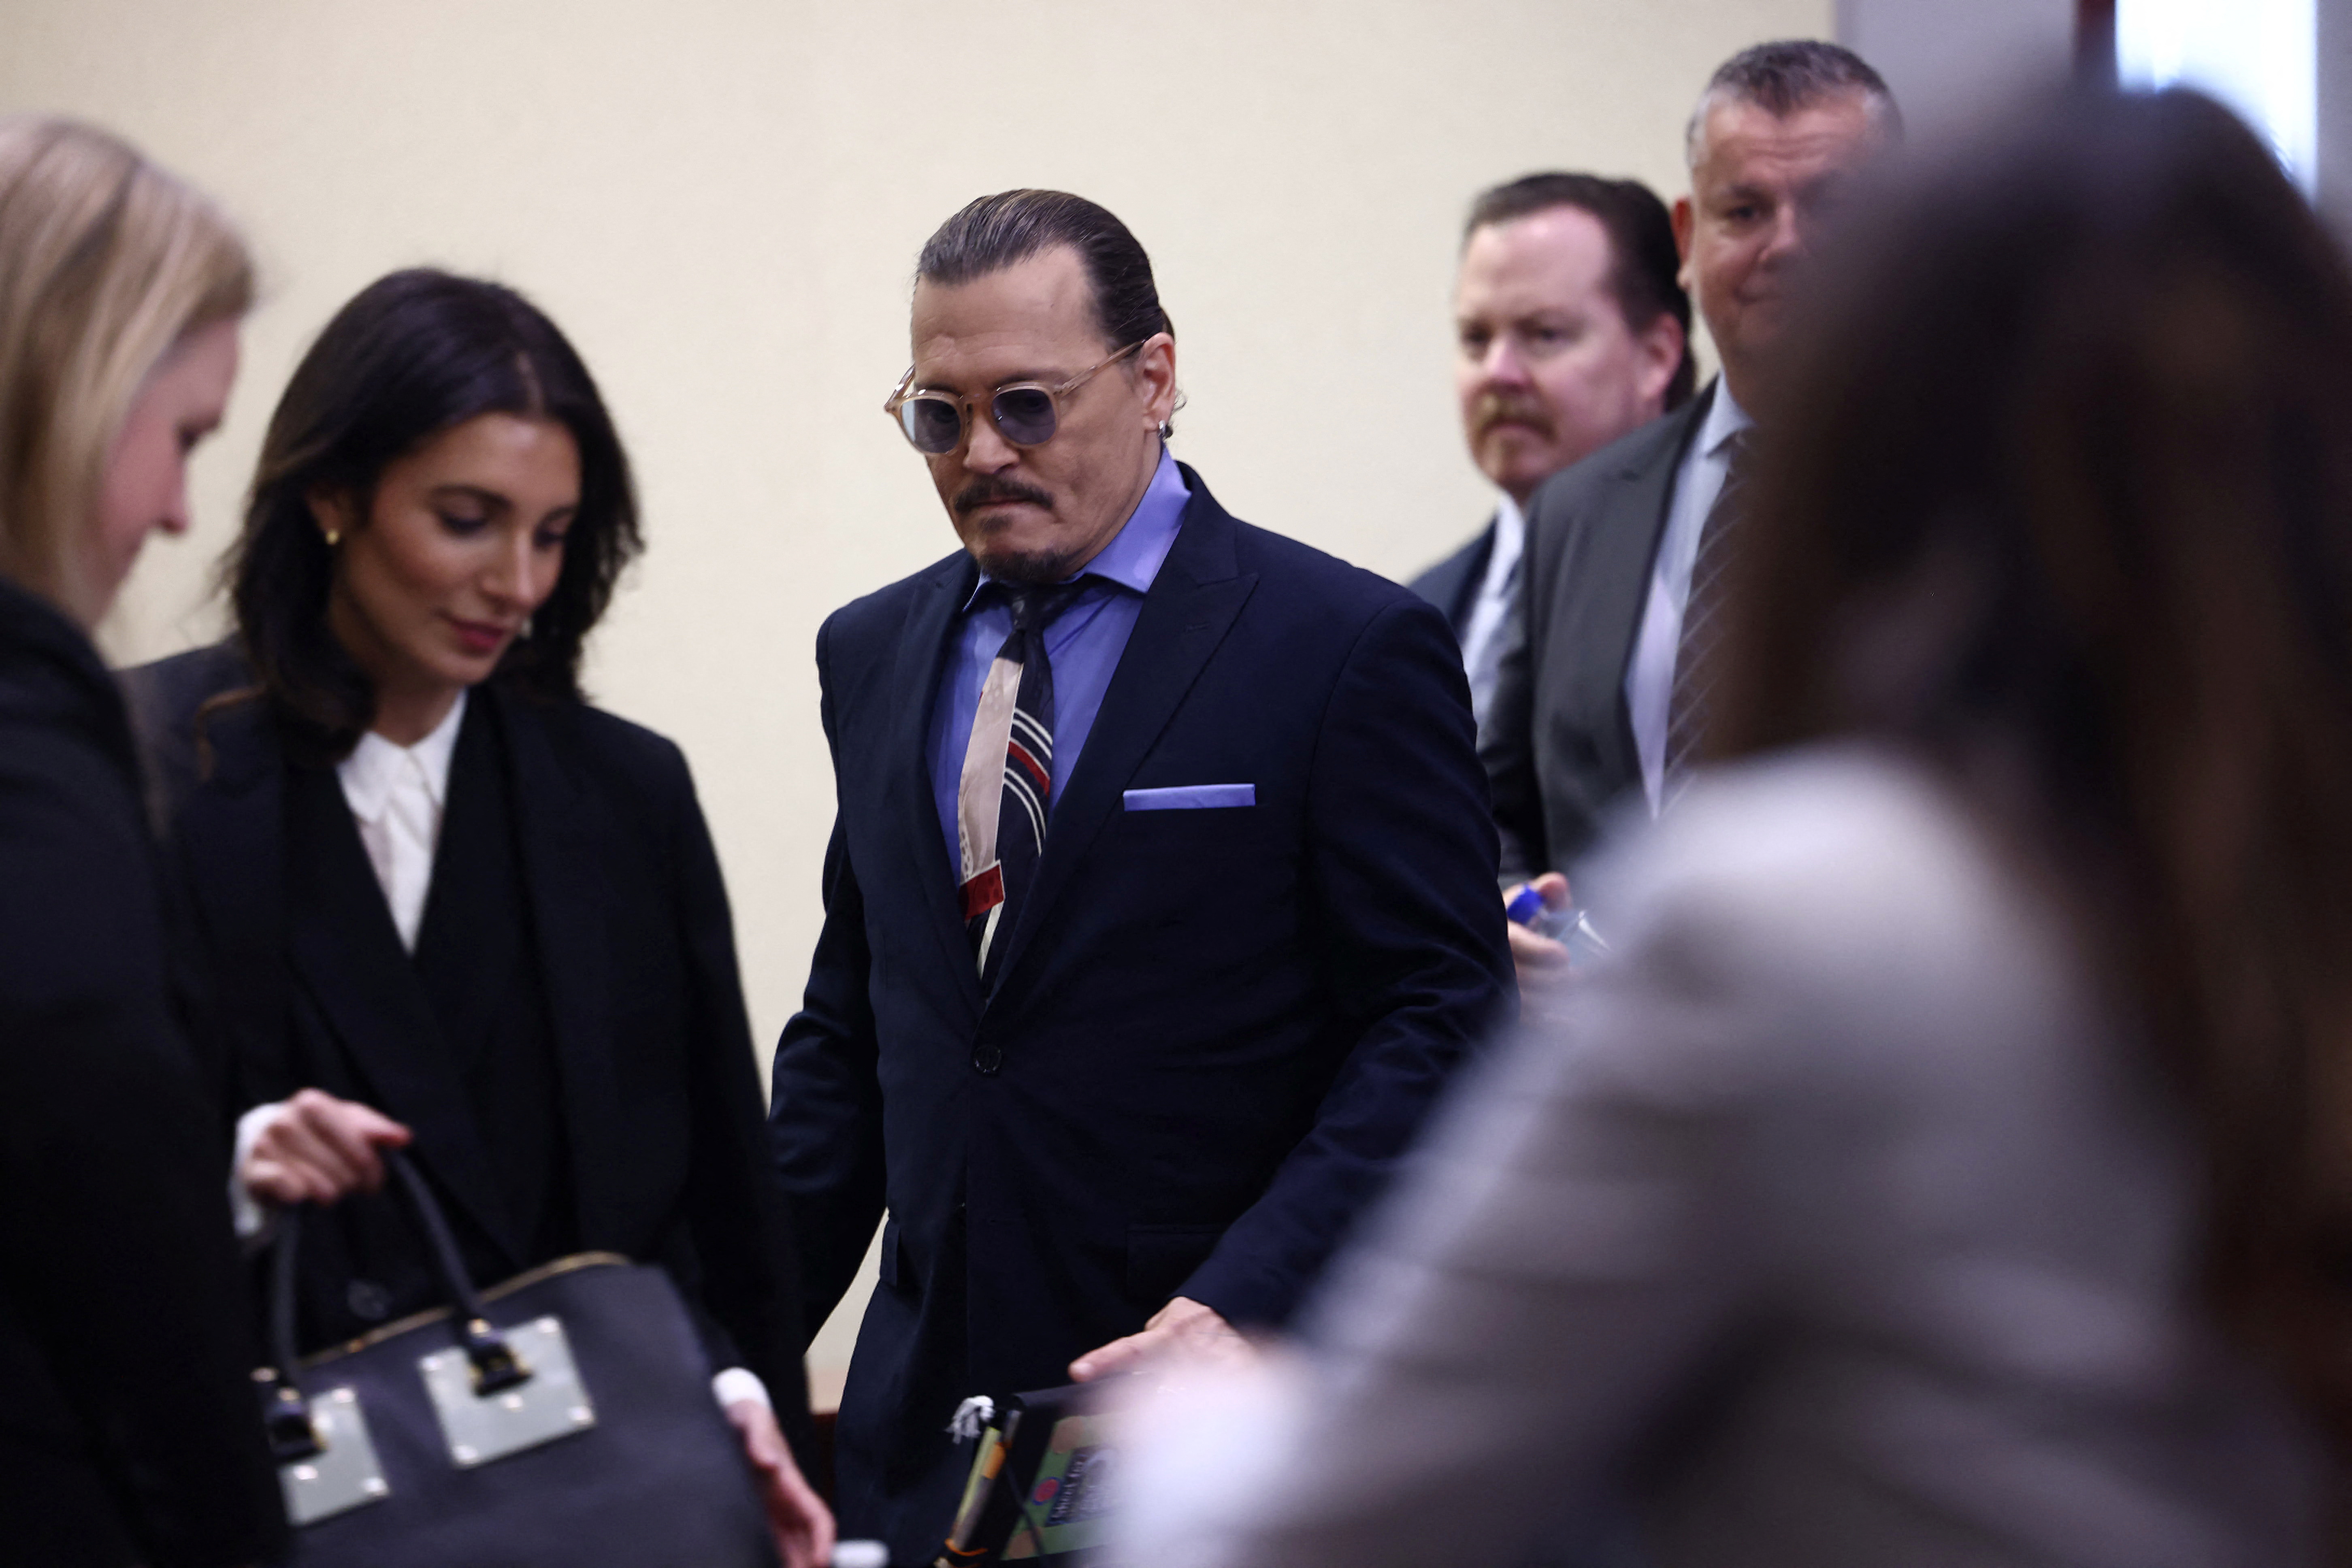 The arrival of actor Johnny Depp in the courtroom (Jim Lo Scalzo/REUTERS)